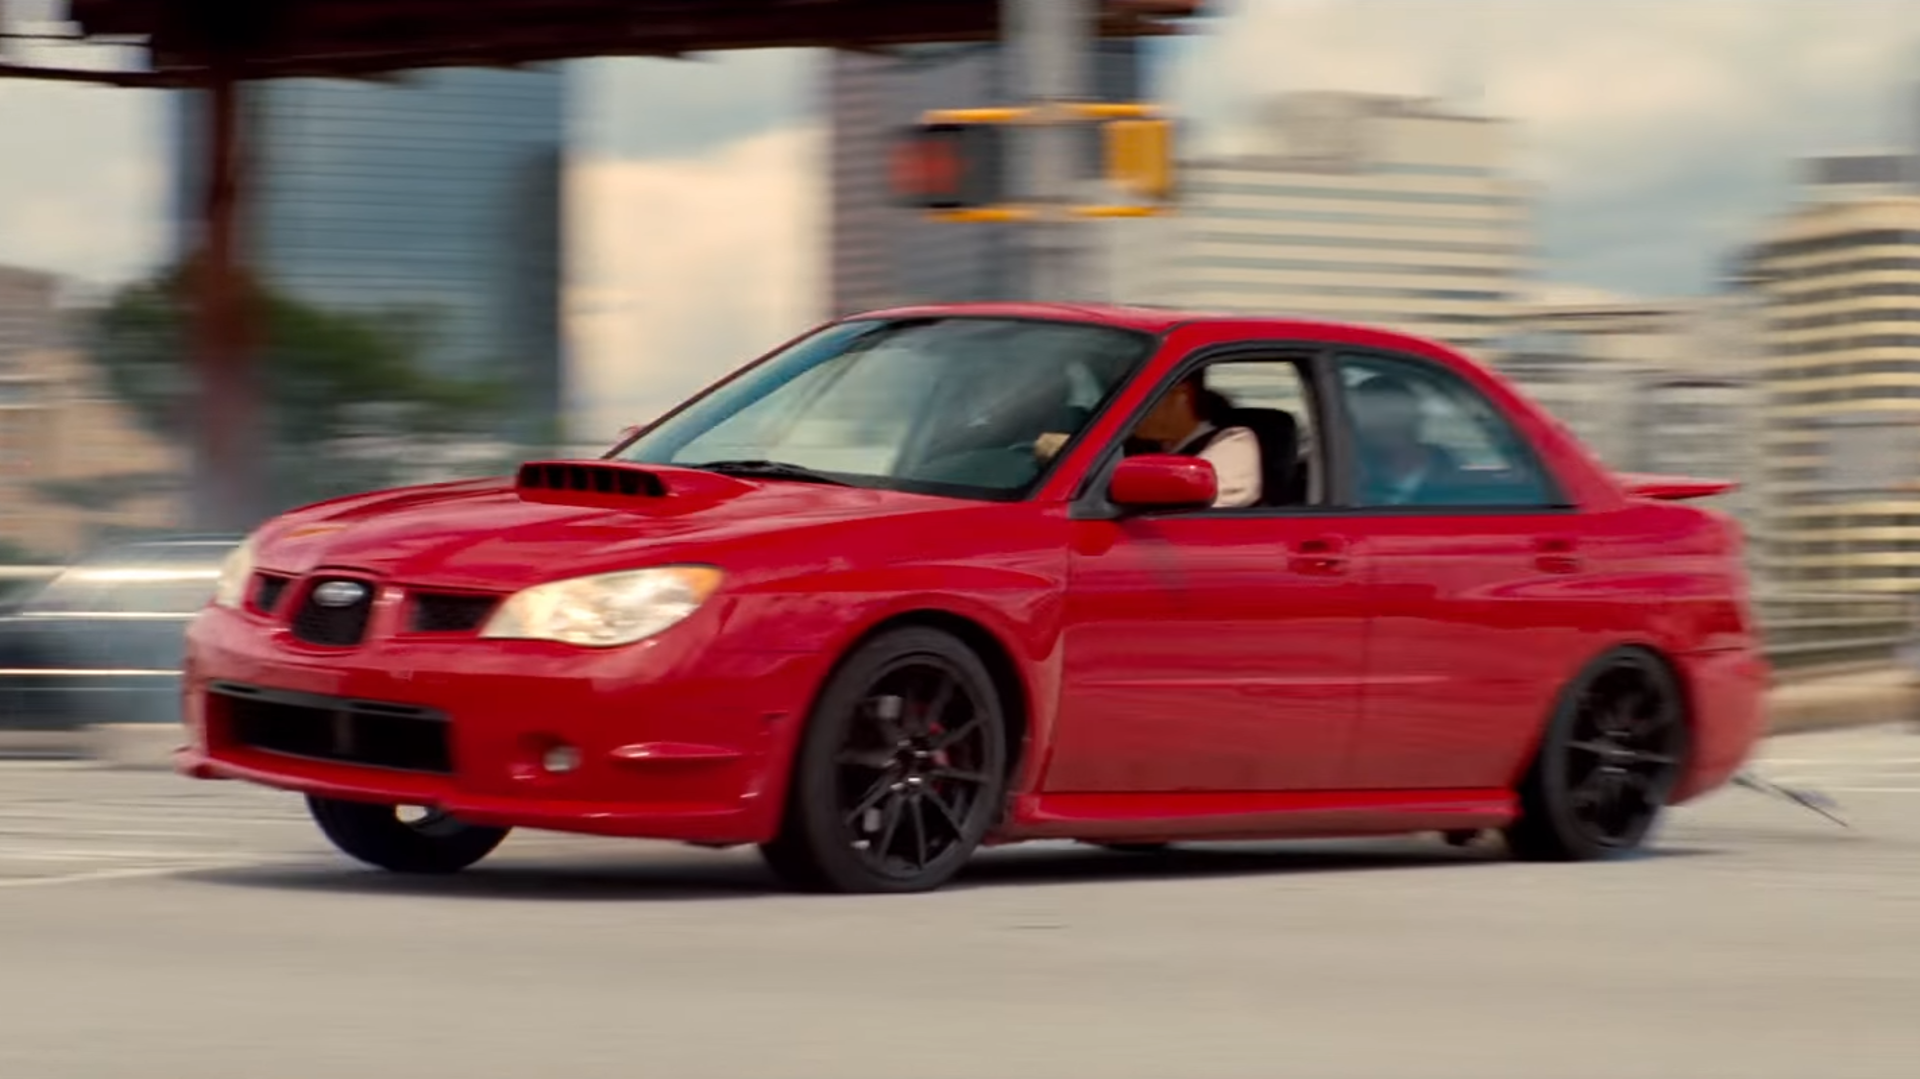 Baby Driver Star Ansel Elgort Kept an Old Subaru WRX Used in Filming